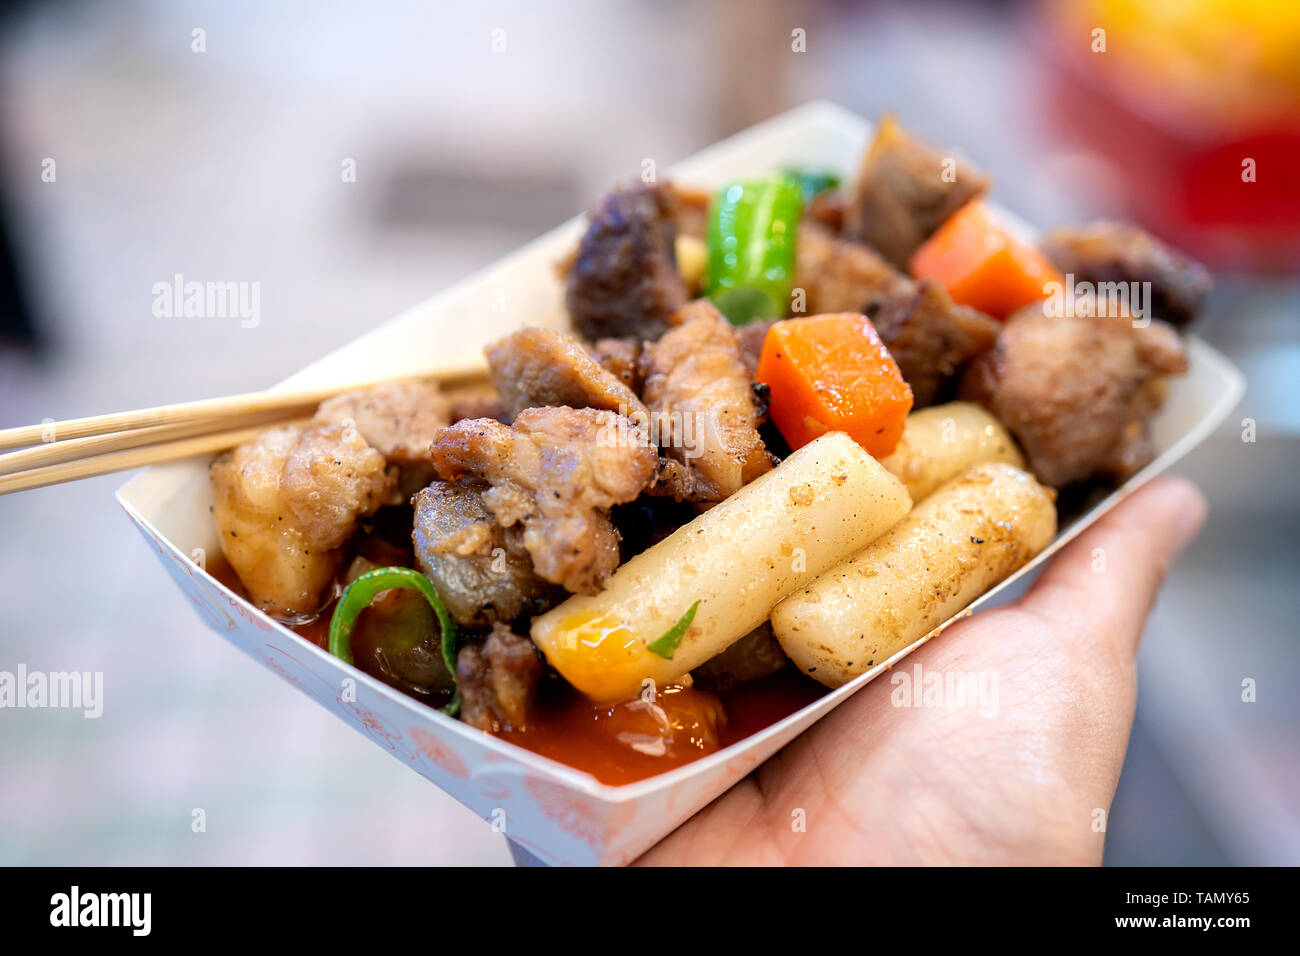 Pan-fried black pork meal in Korea traditional market, delicious korean food cuisine with carrot and shallot green onion, close up, copy space Stock Photo